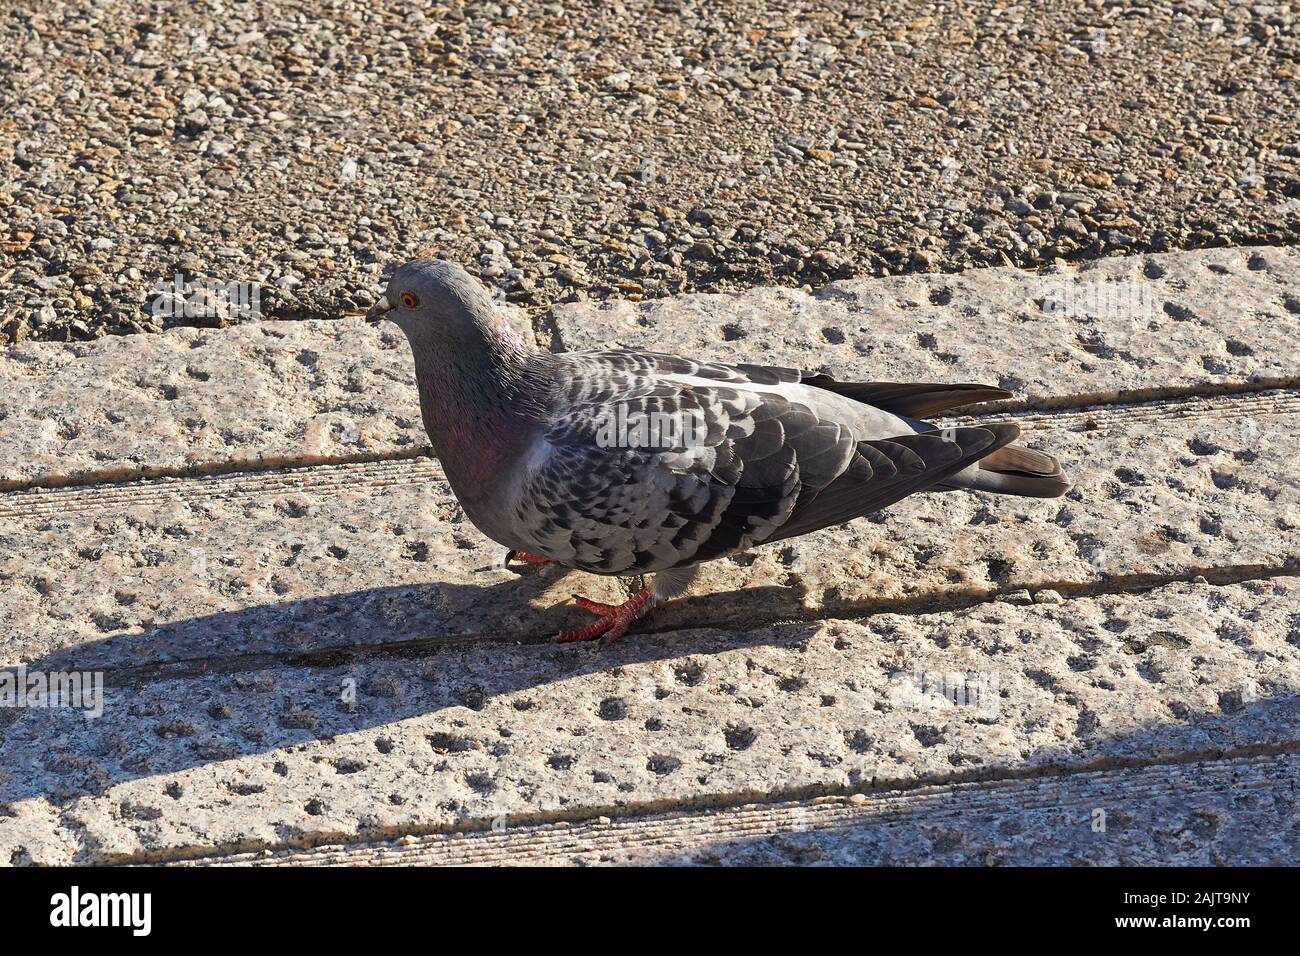 A rock dove (rock pigeon, common pigeon) with some iridescent purple feathers on its neck walks on a stone path in Seoul, South Korea. Stock Photo